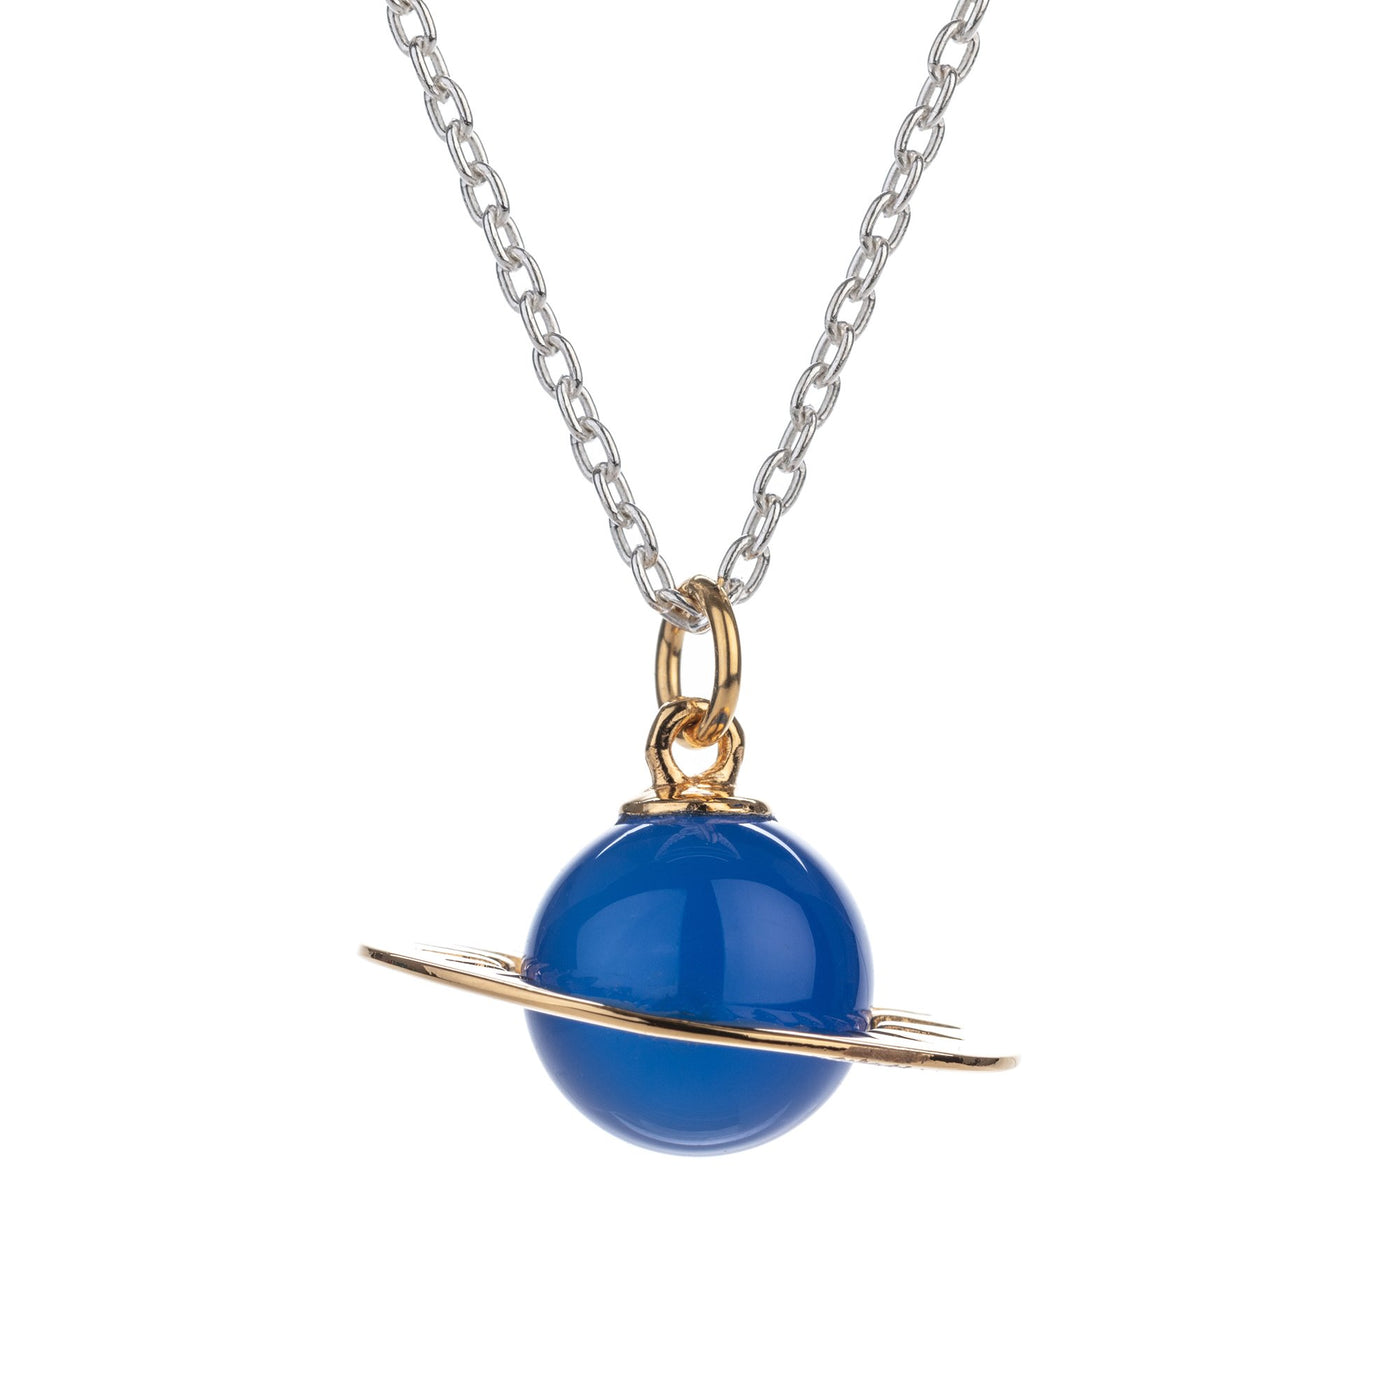 Gold Planet Necklace Tina Lilienthal